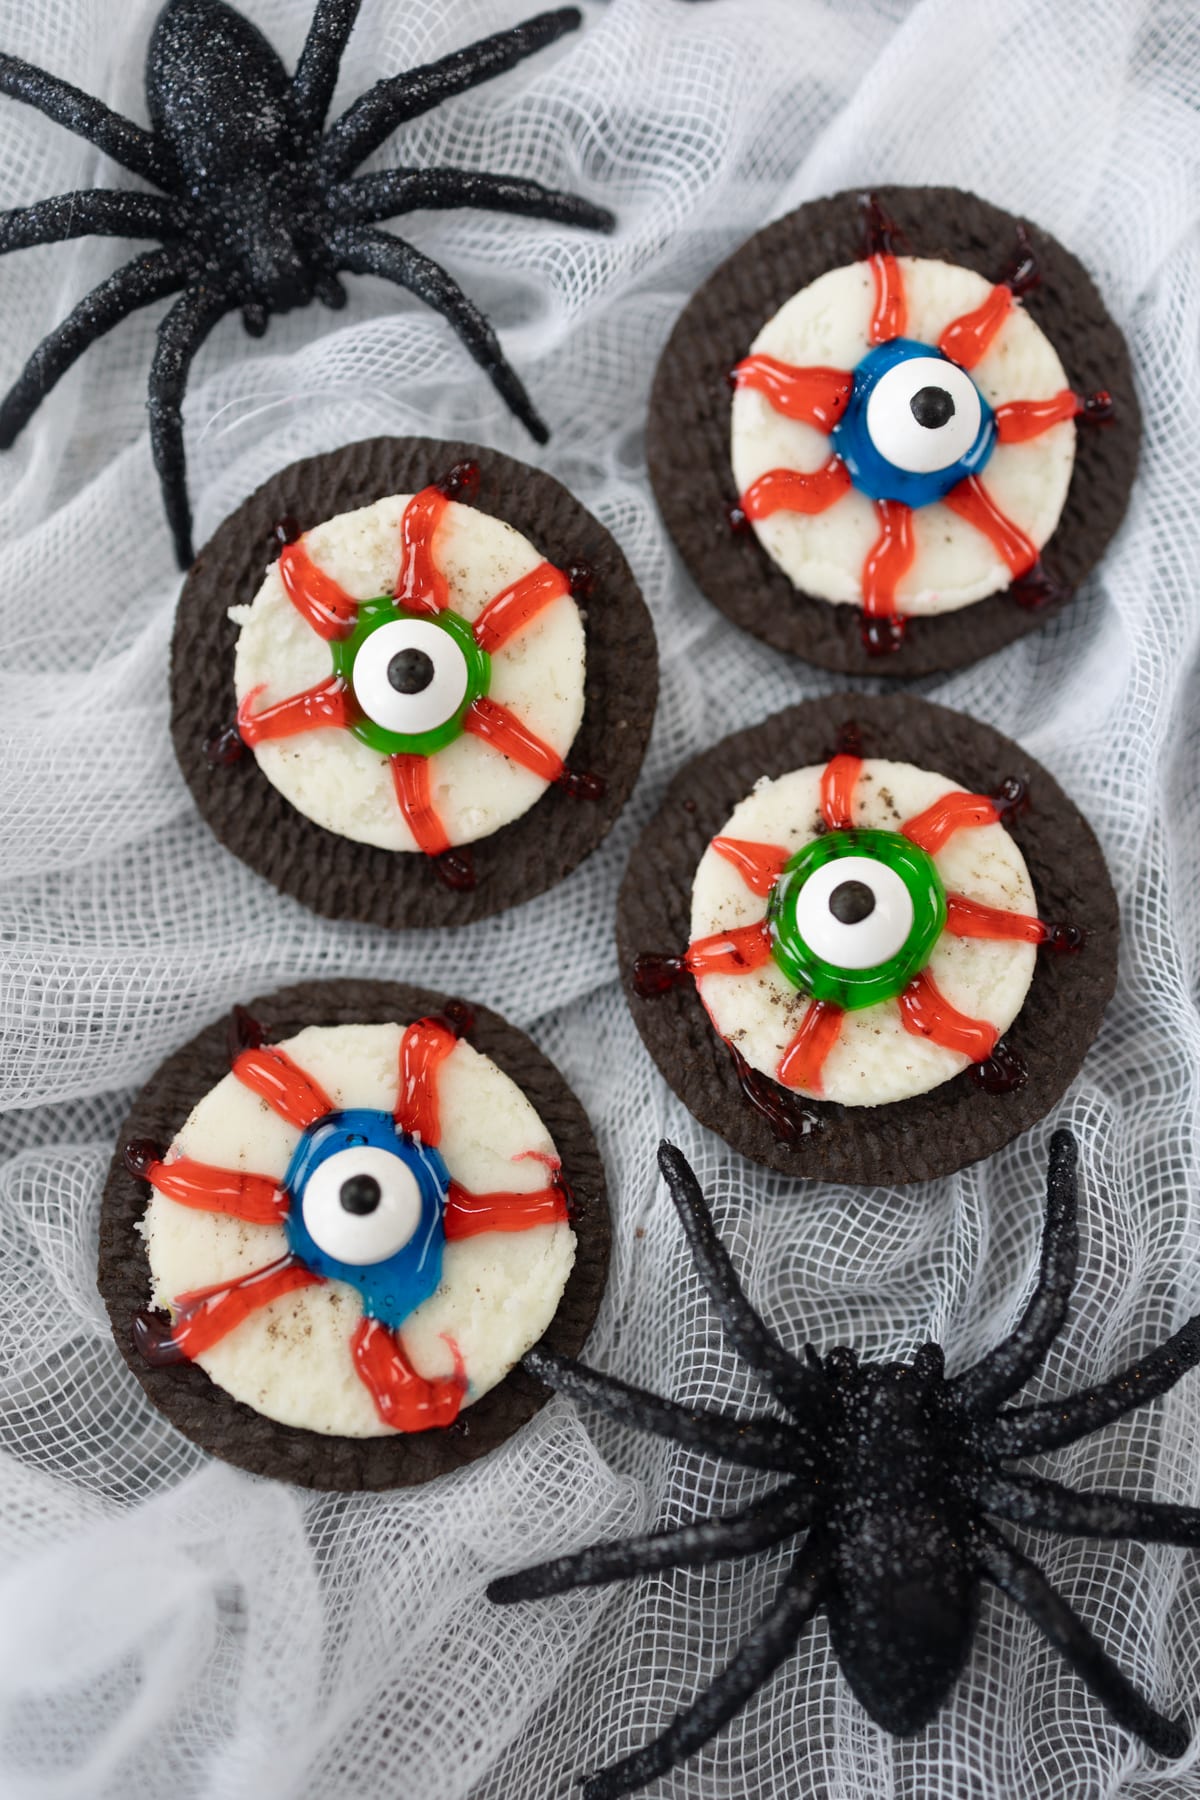 Top view of eyeball cookies next to a plastic spider.